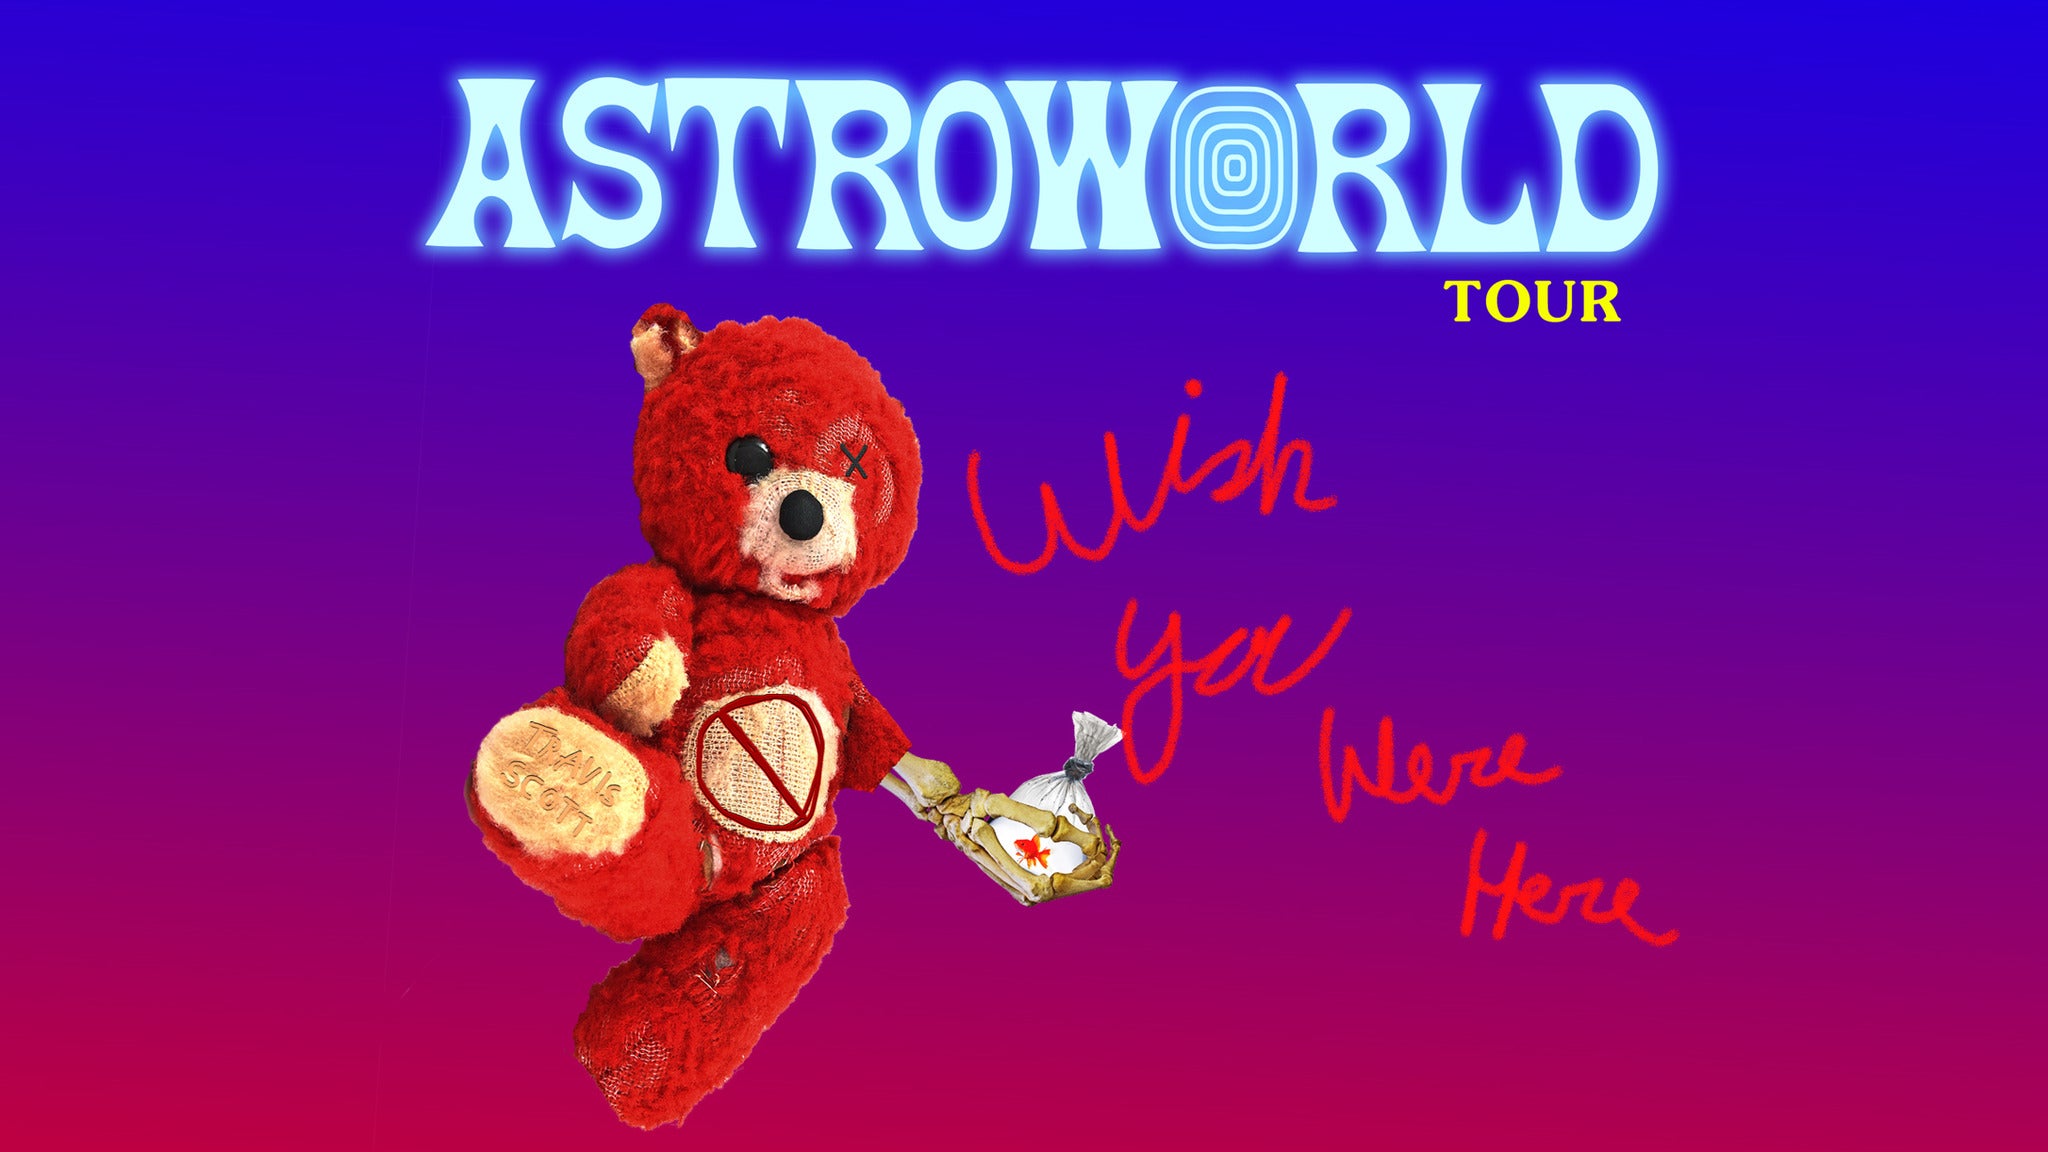 TRAVIS SCOTT - ASTROWORLD: WISH YOU WERE HERE TOUR in New York promo photo for Live Nation Mobile App presale offer code